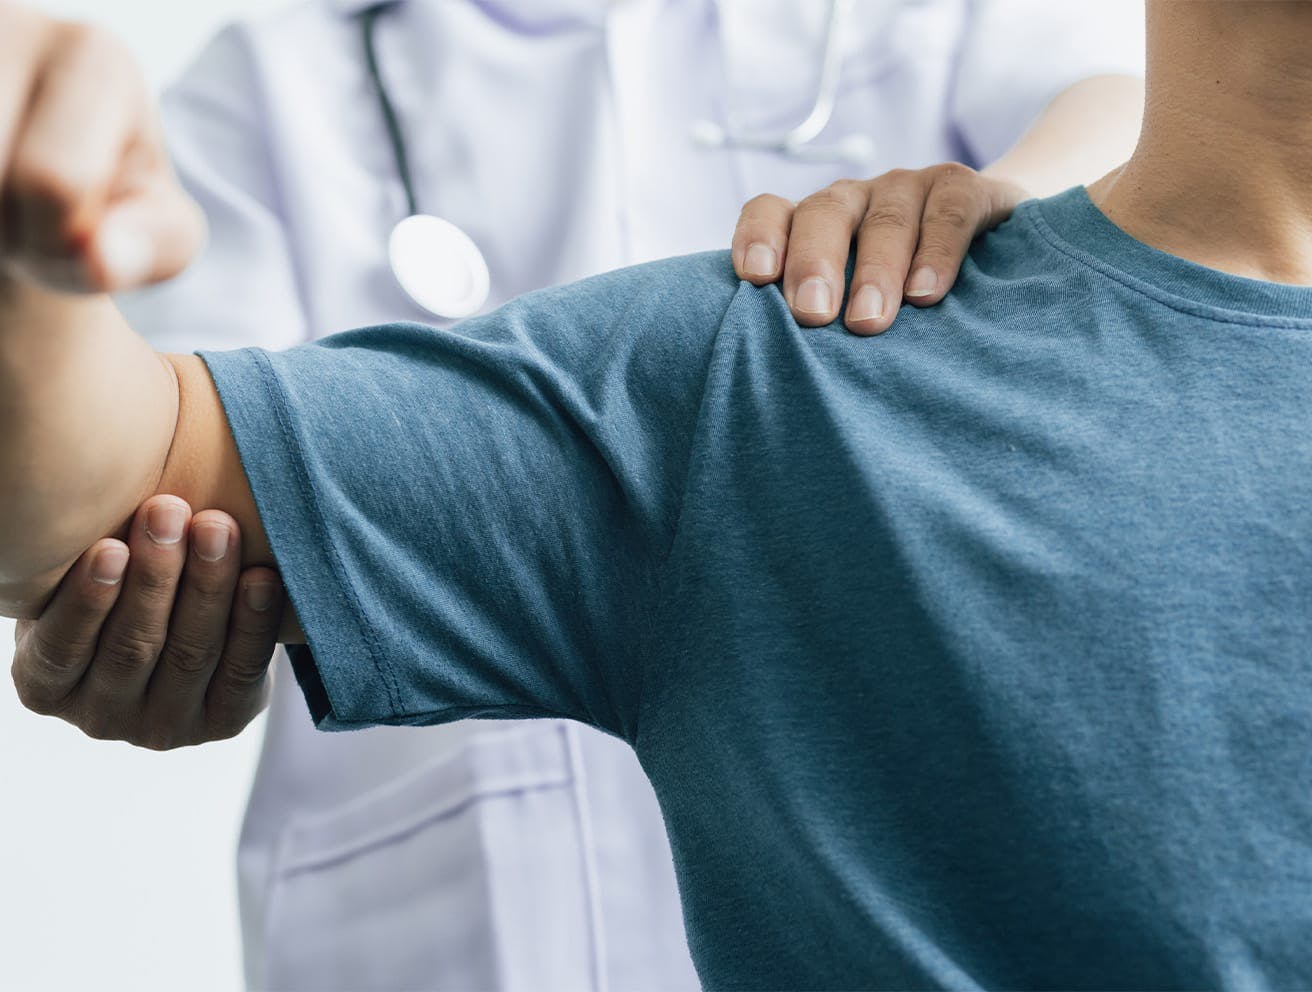 doctor lifting a patient's arm